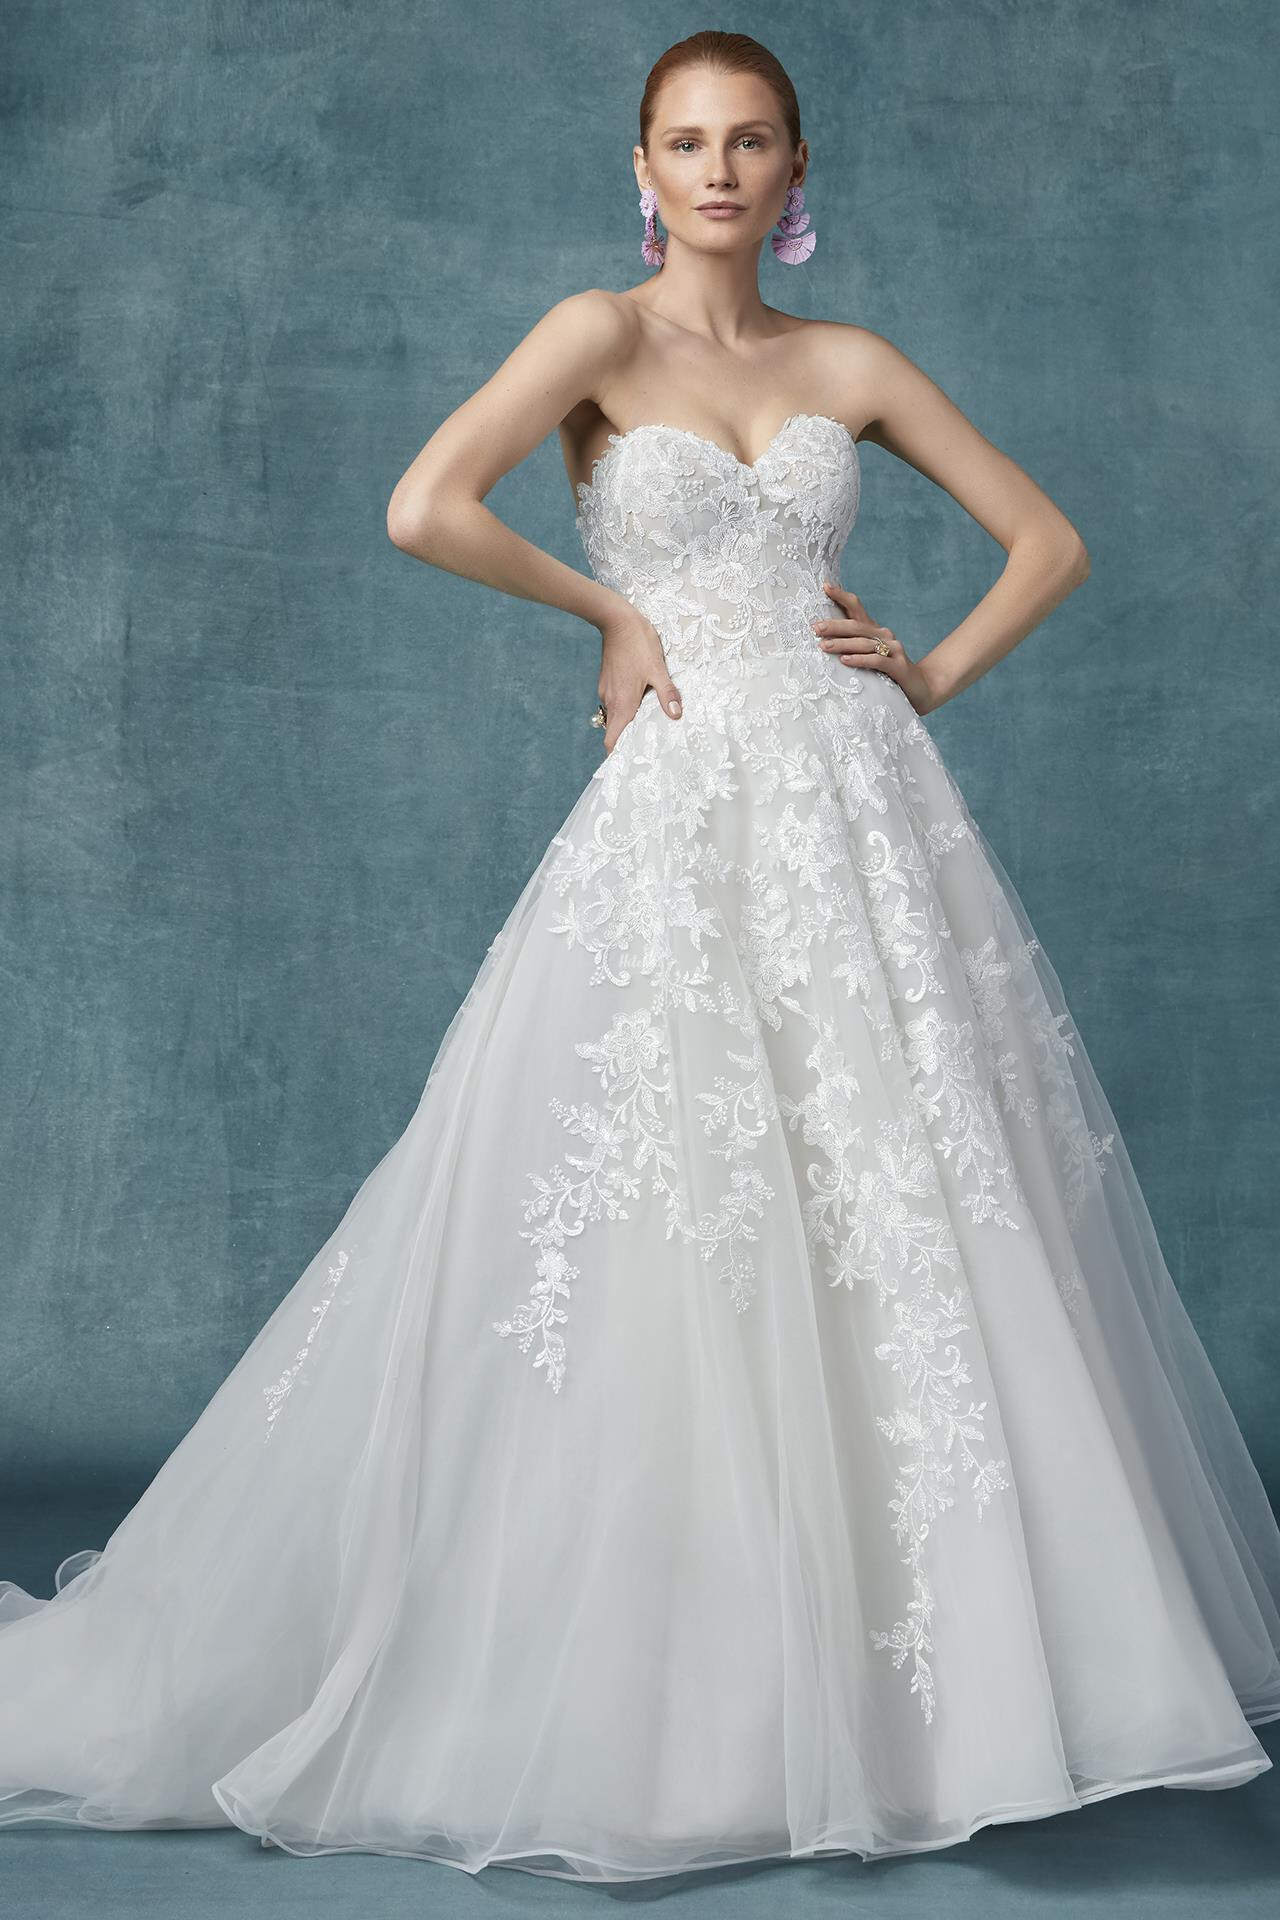 Kathleen Wedding Dress from Maggie Sottero - hitched.co.uk